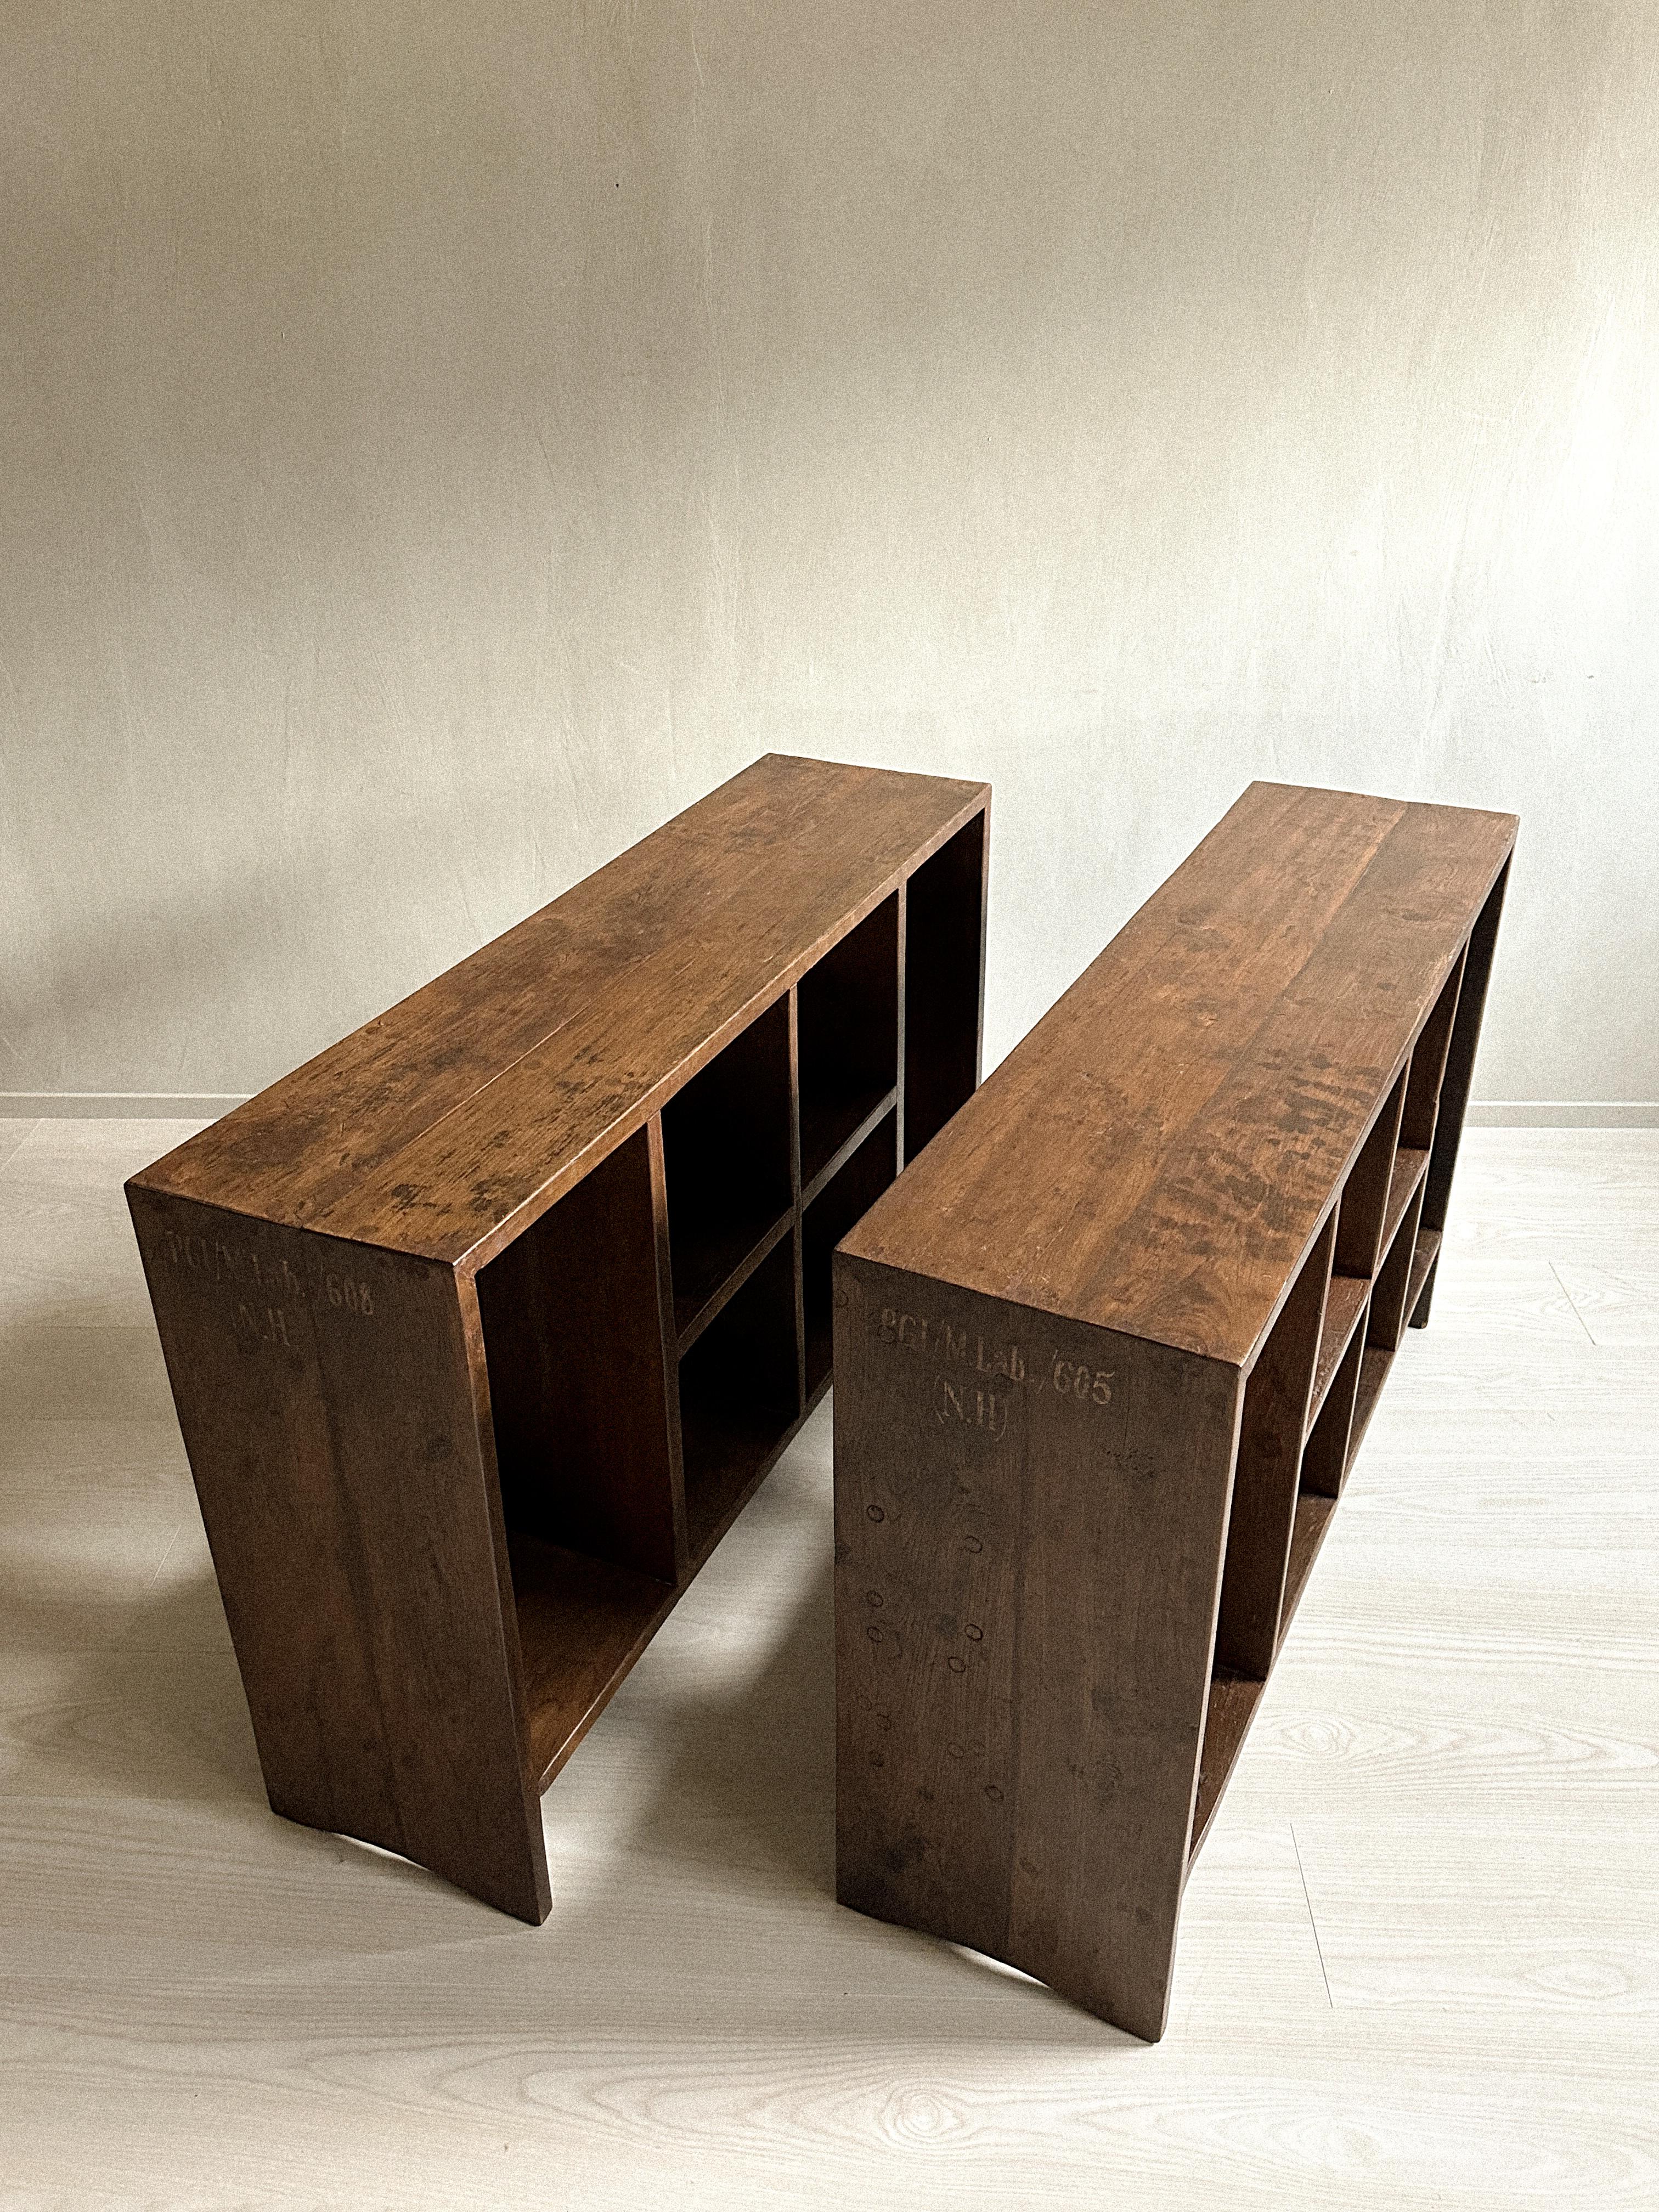 A Pair of Pierre Jeanneret '1896-1967' 'PJ-R-27-A' File Racks, India, 1950s For Sale 4